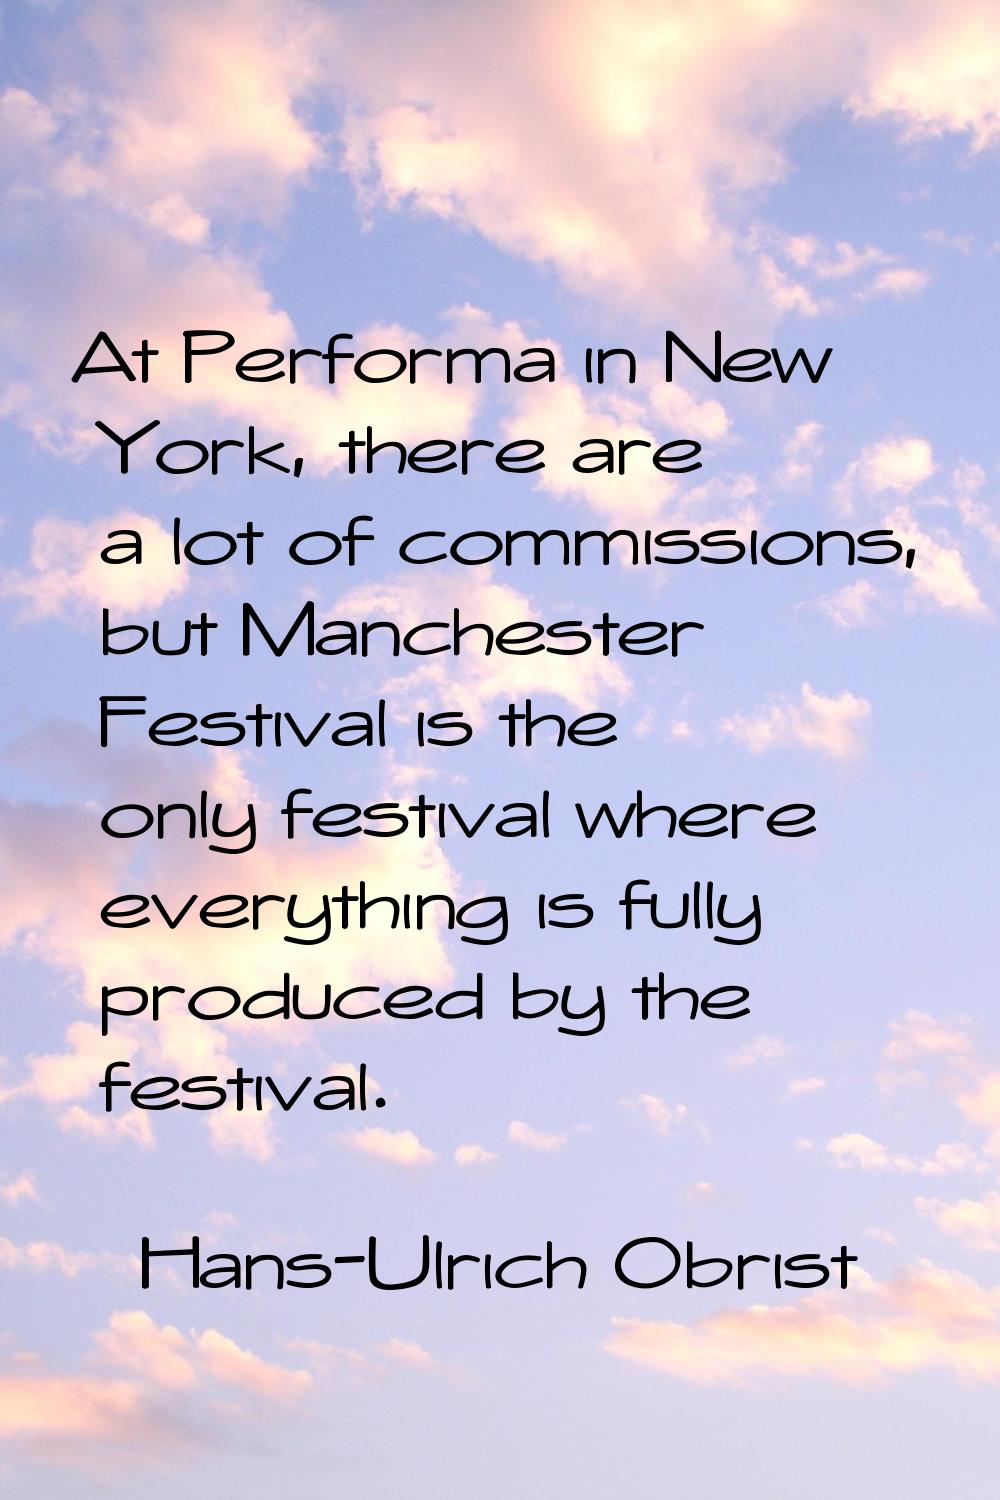 At Performa in New York, there are a lot of commissions, but Manchester Festival is the only festiv